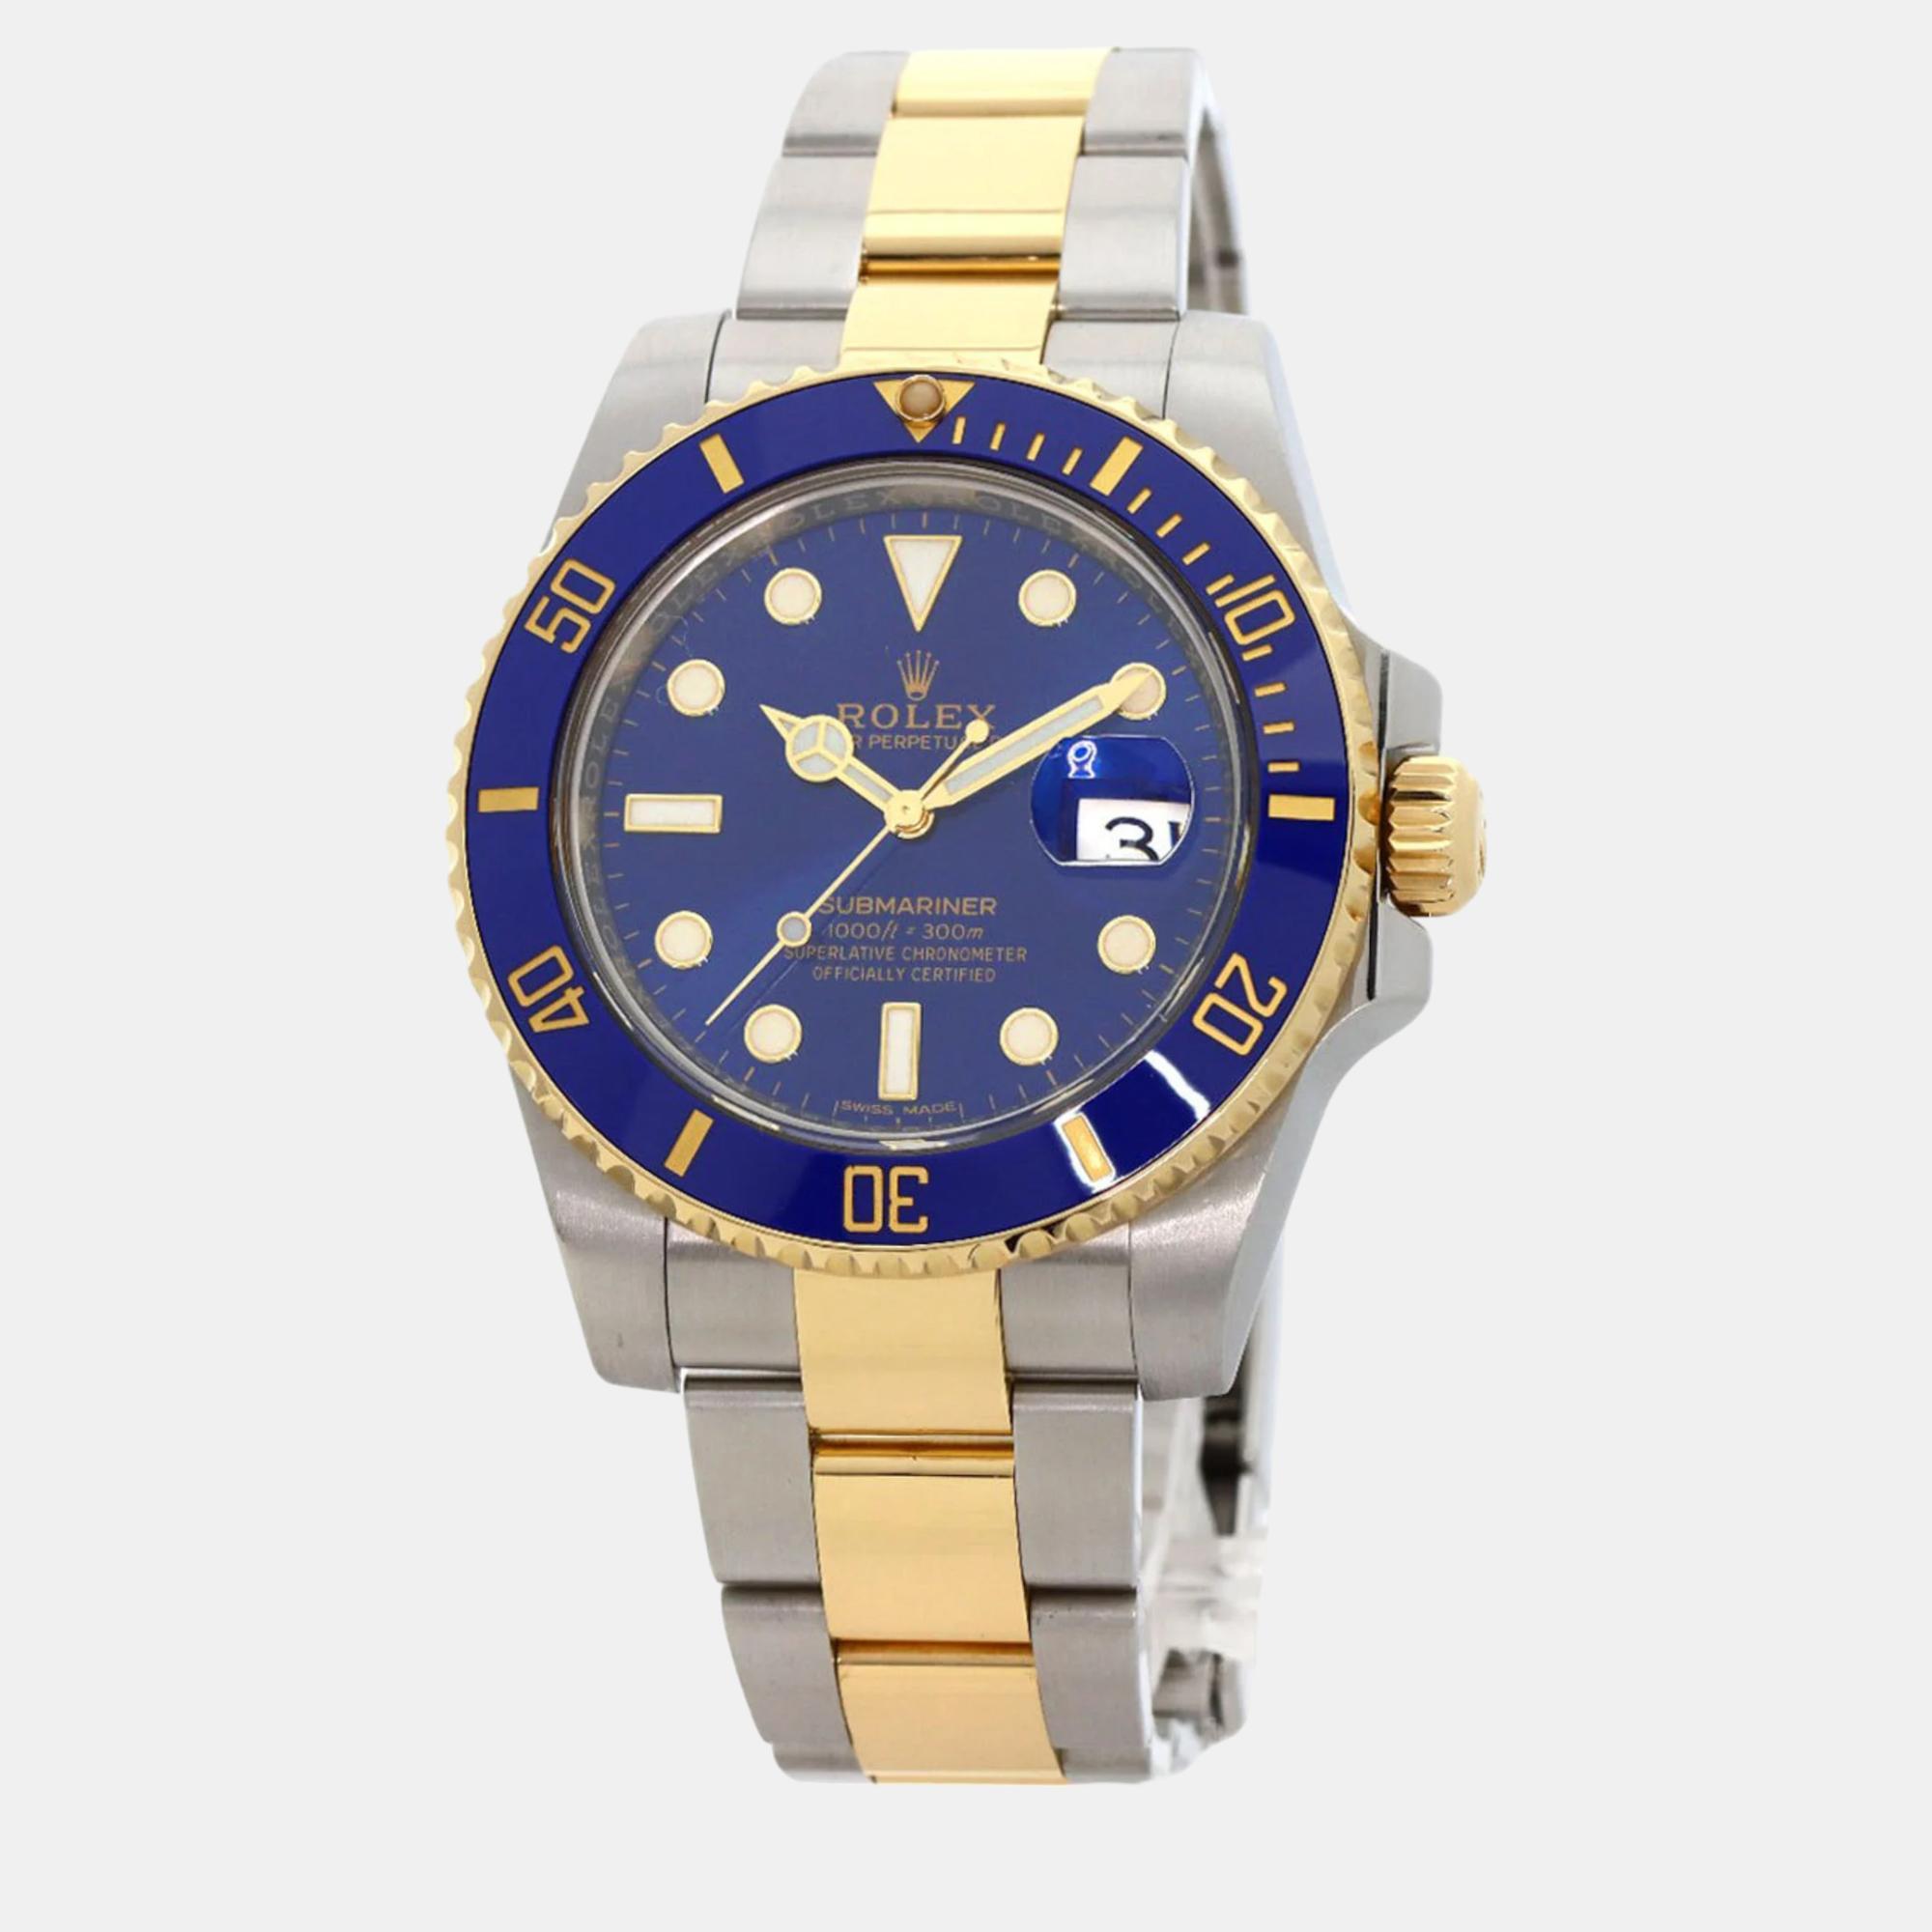 

Rolex Blue 18k Yellow Gold Stainless Steel Submariner 116613LB Automatic Men's Wristwatch 40 mm